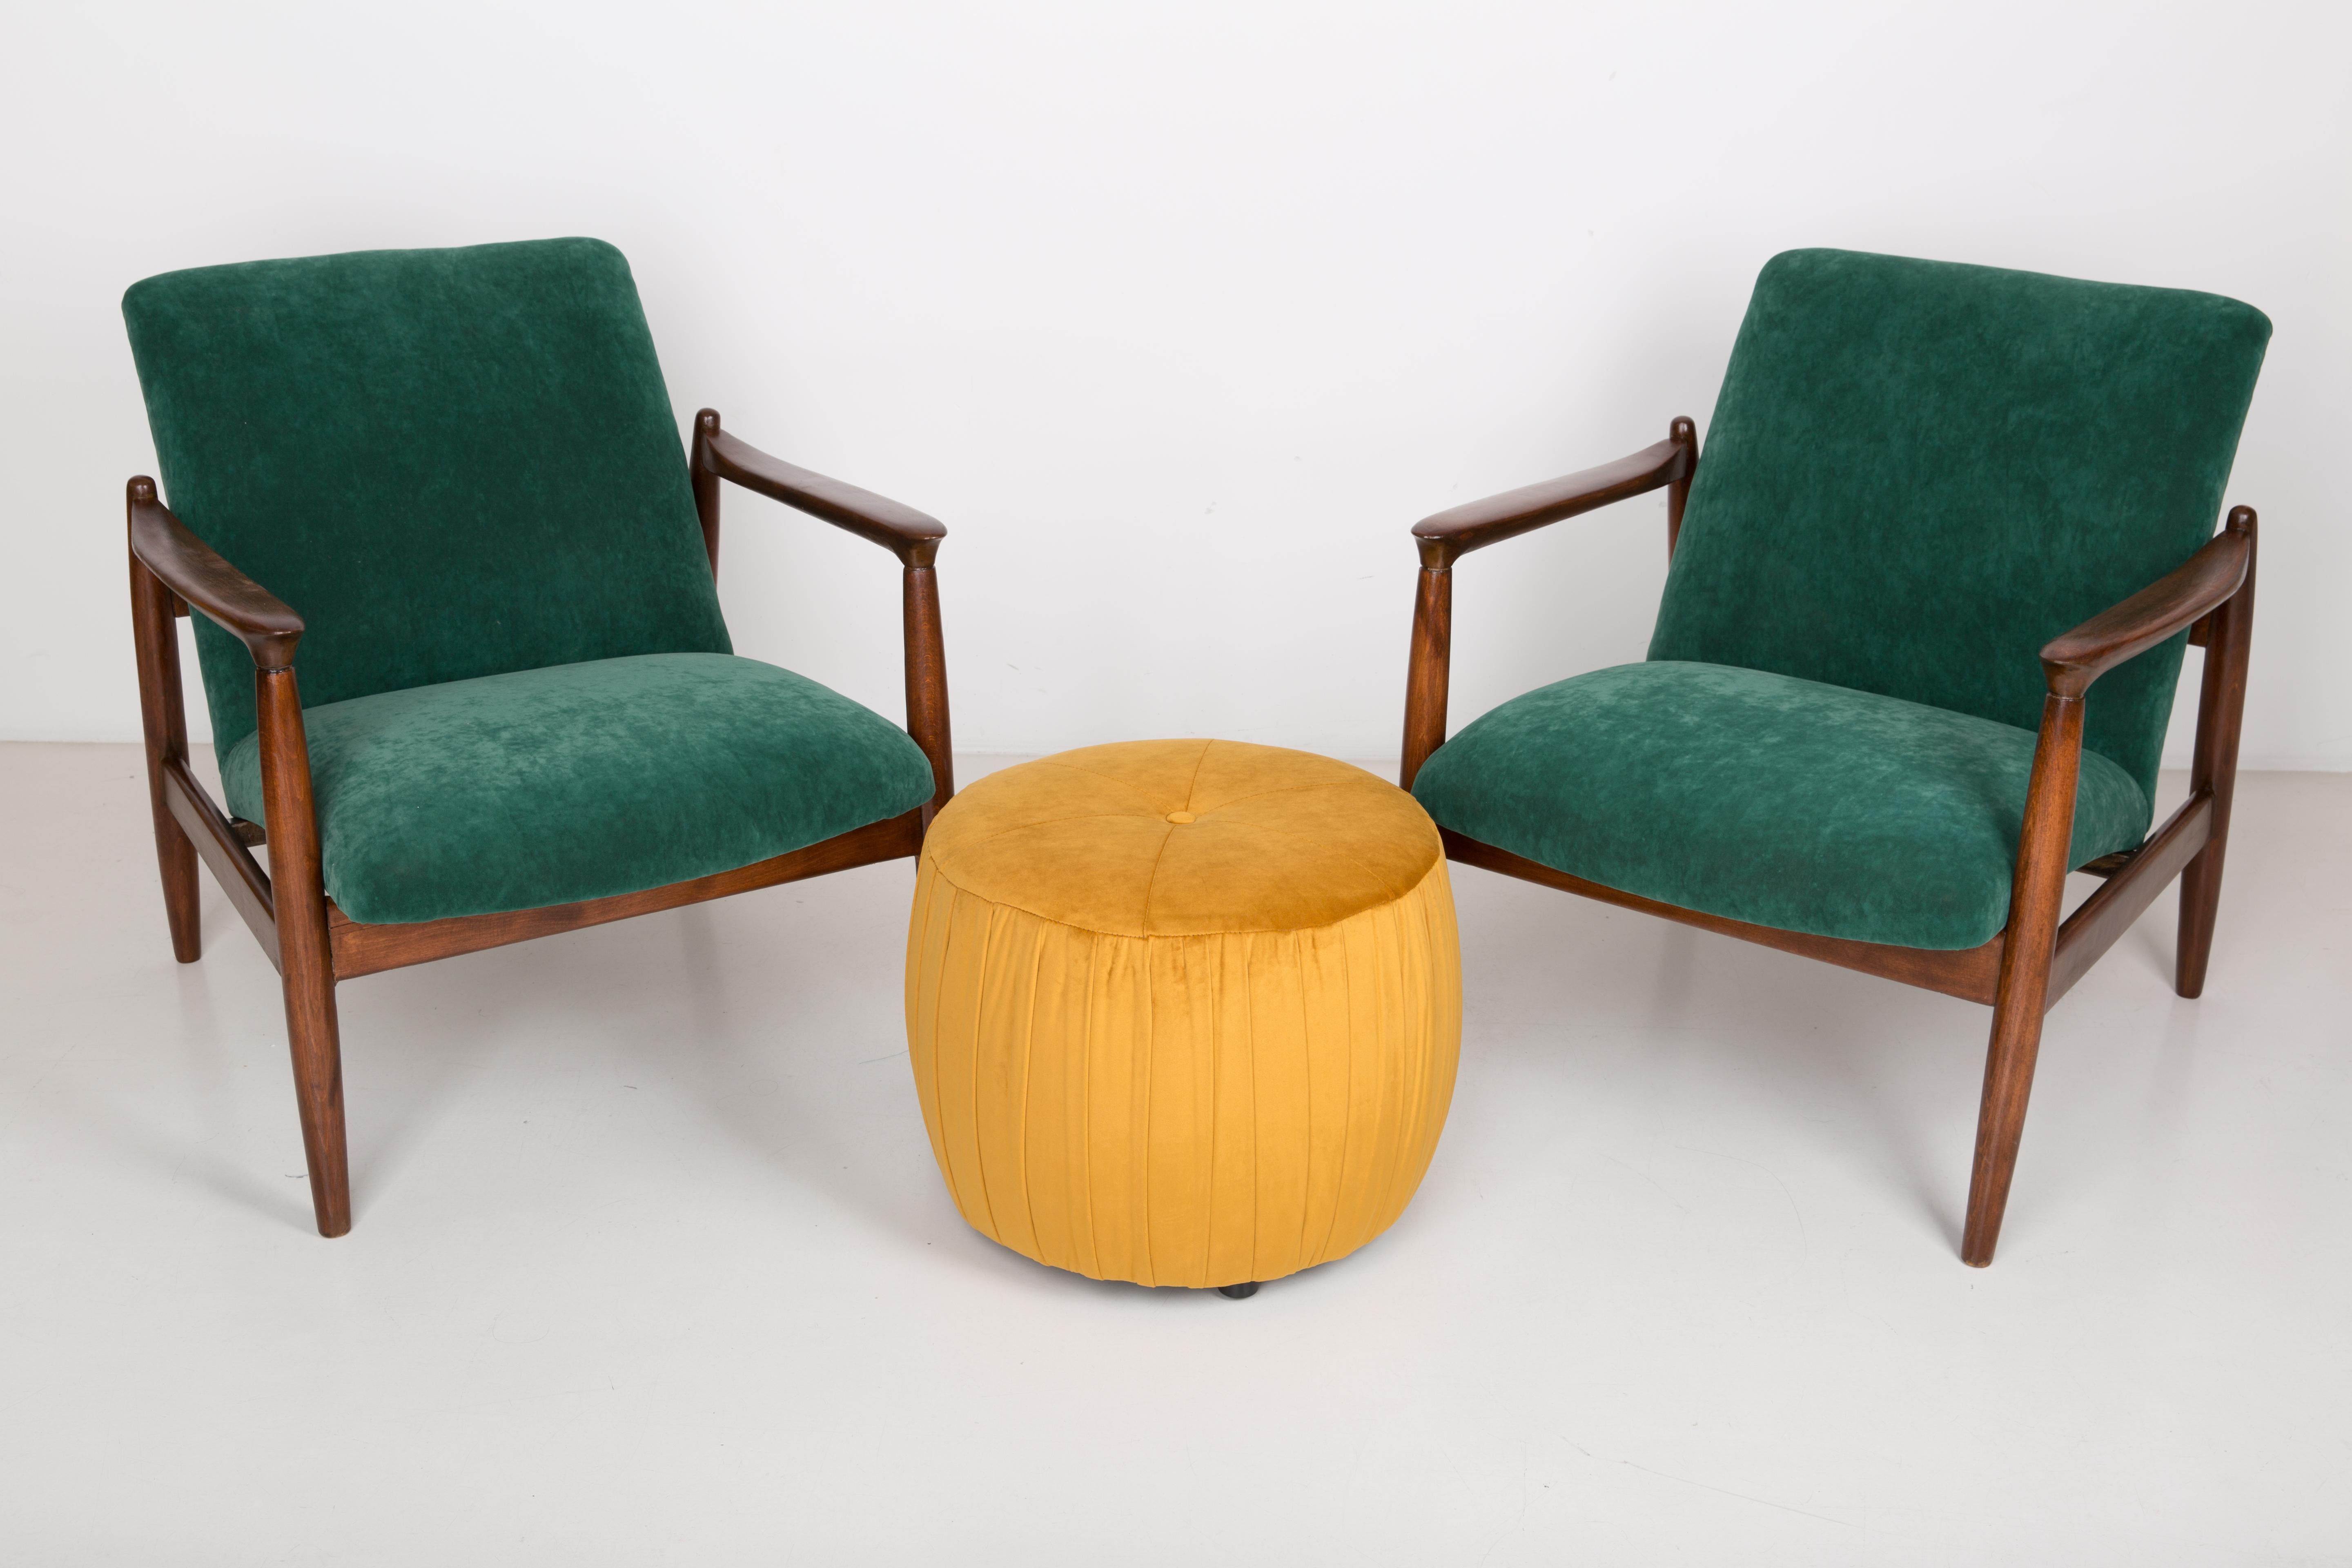 A pair of dark green armchairs, designed by Edmund Homa. The armchairs were made in the 1960s in the Gosciecinska Furniture Factory. They are made from solid beechwood. The GFM type armchair is regarded one of the best polish armchair design from